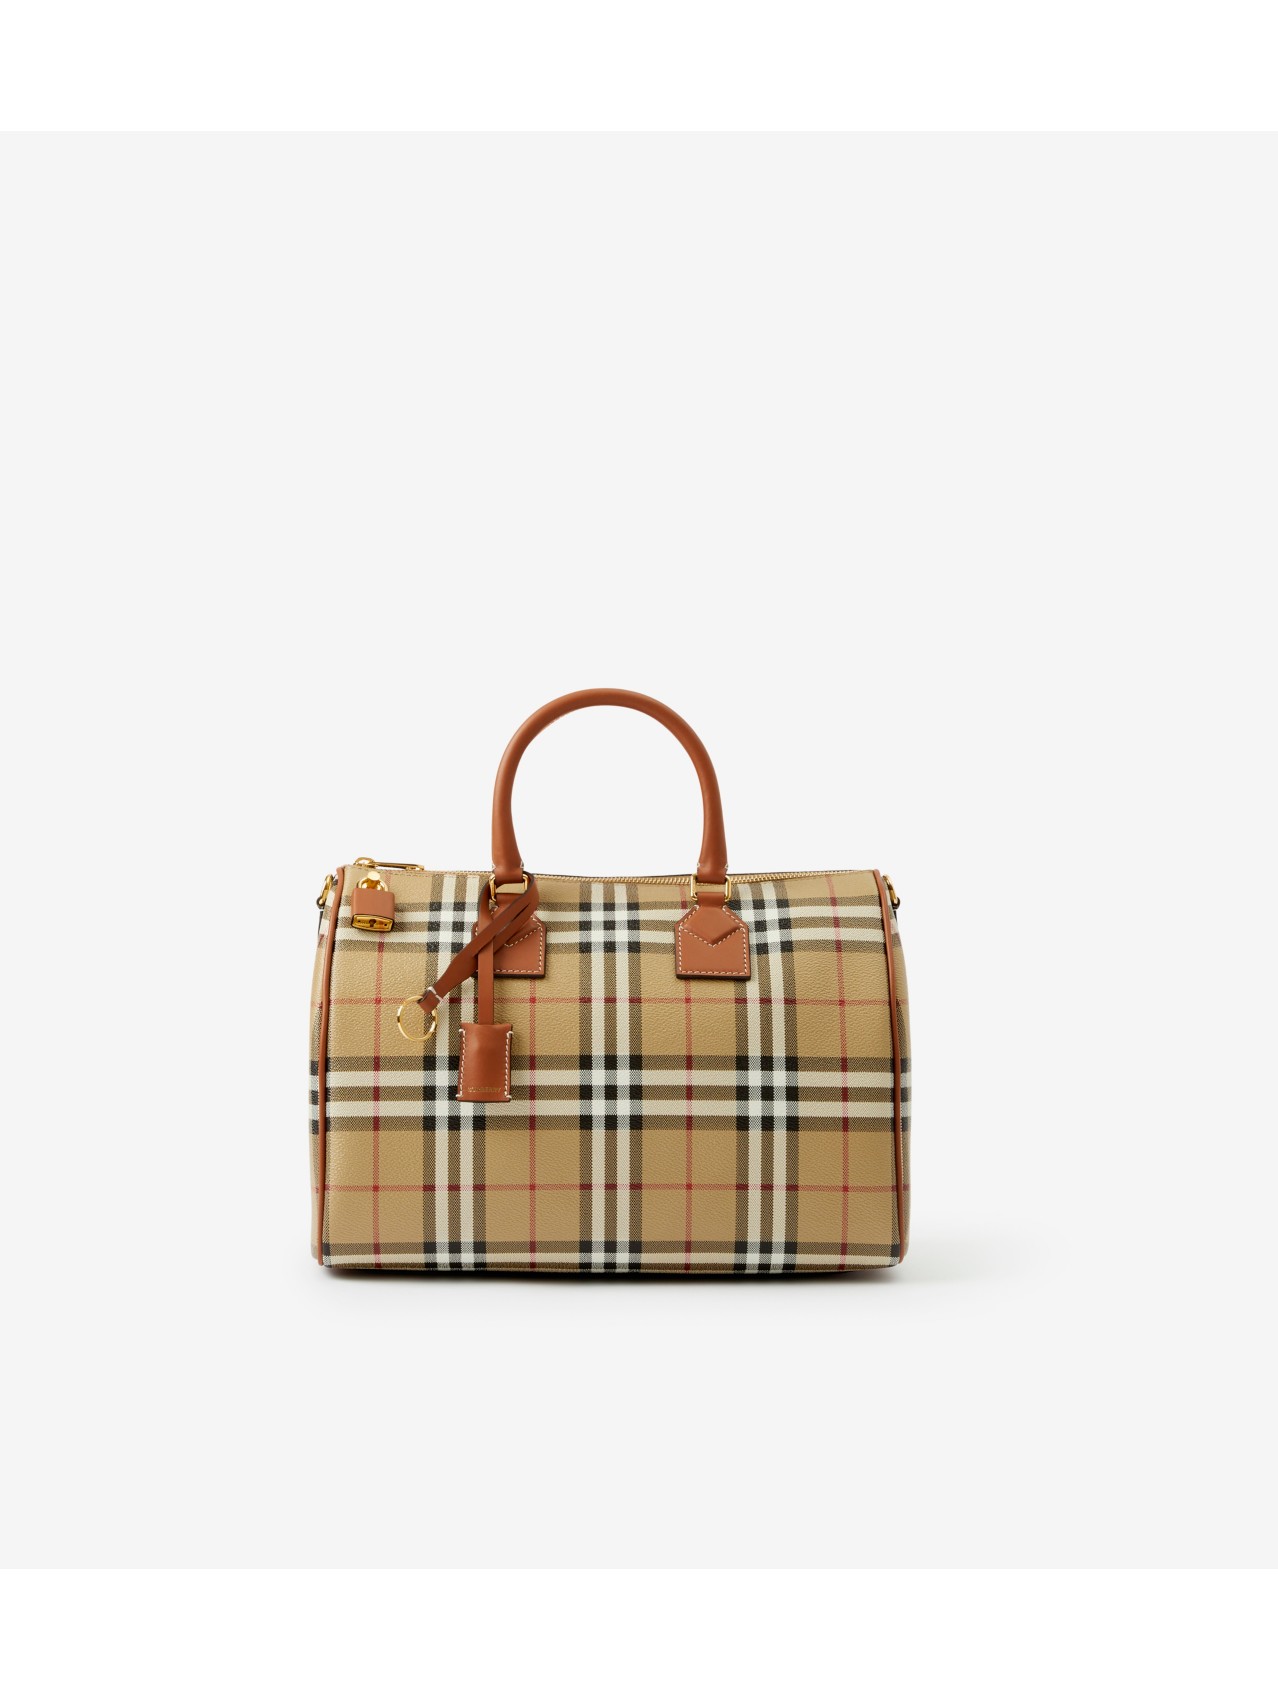 Burberry launches the new 'It' bag of Spring 2015